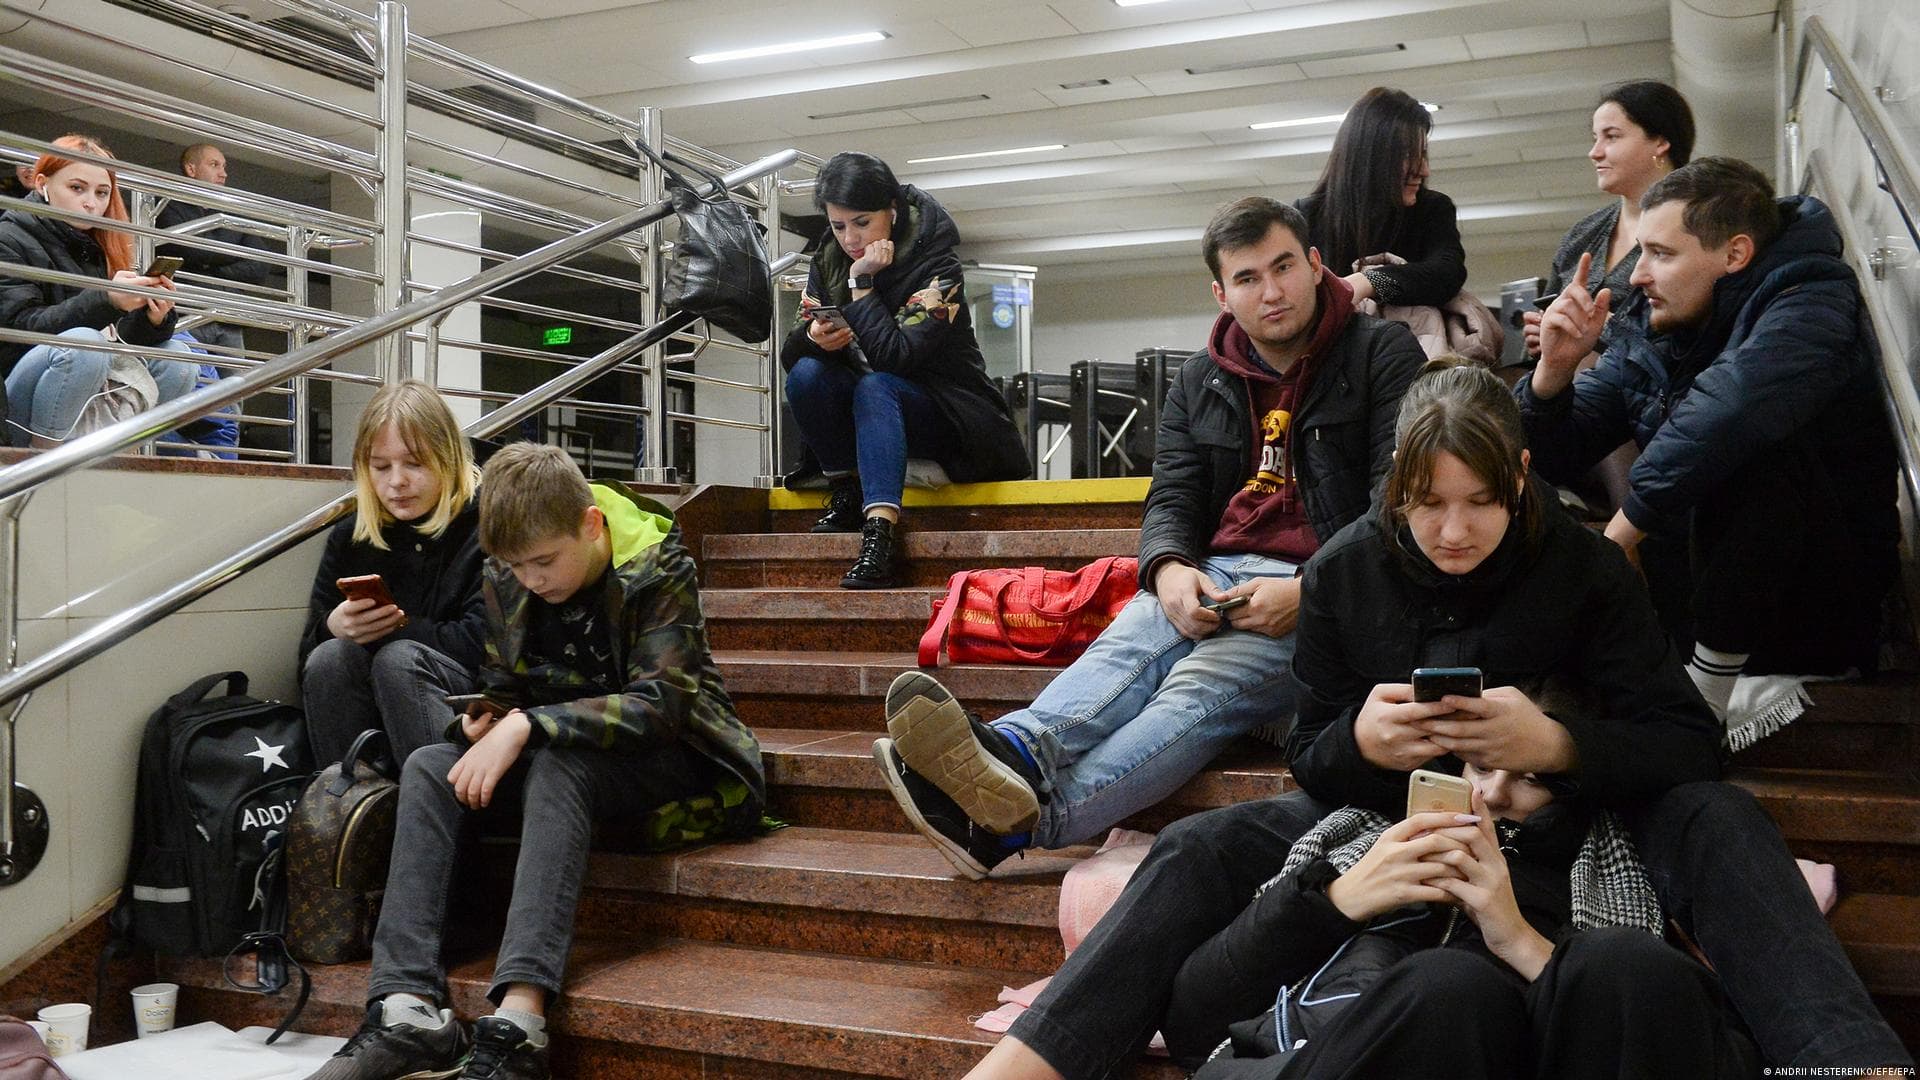 People in the Ukrainian capital sheltered inside metro stations, checking for updates as the city came under renewed shelling on Monday